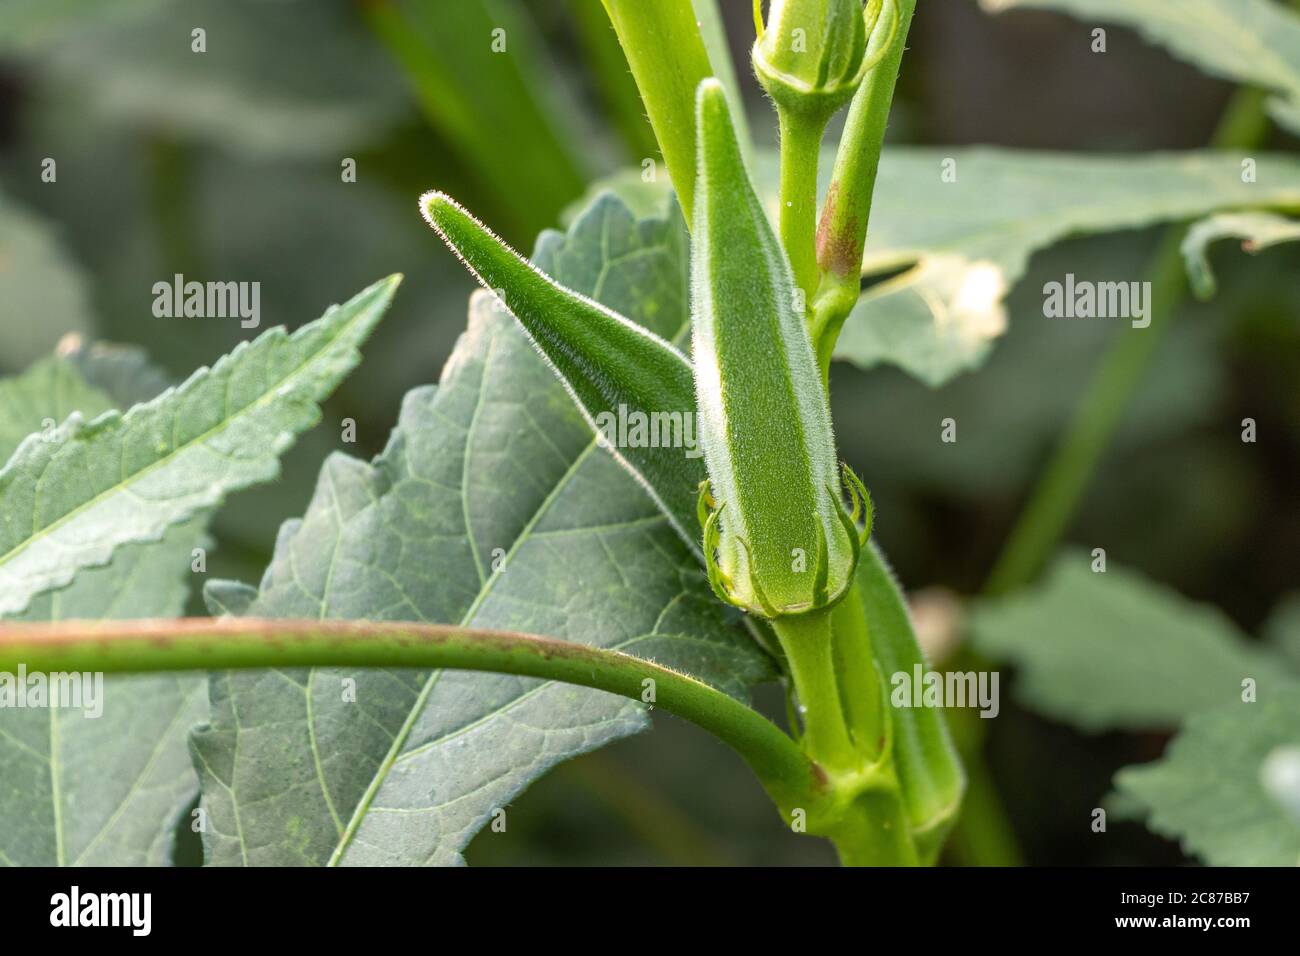 Okra or lady finger growing in farm, selective focus Stock Photo